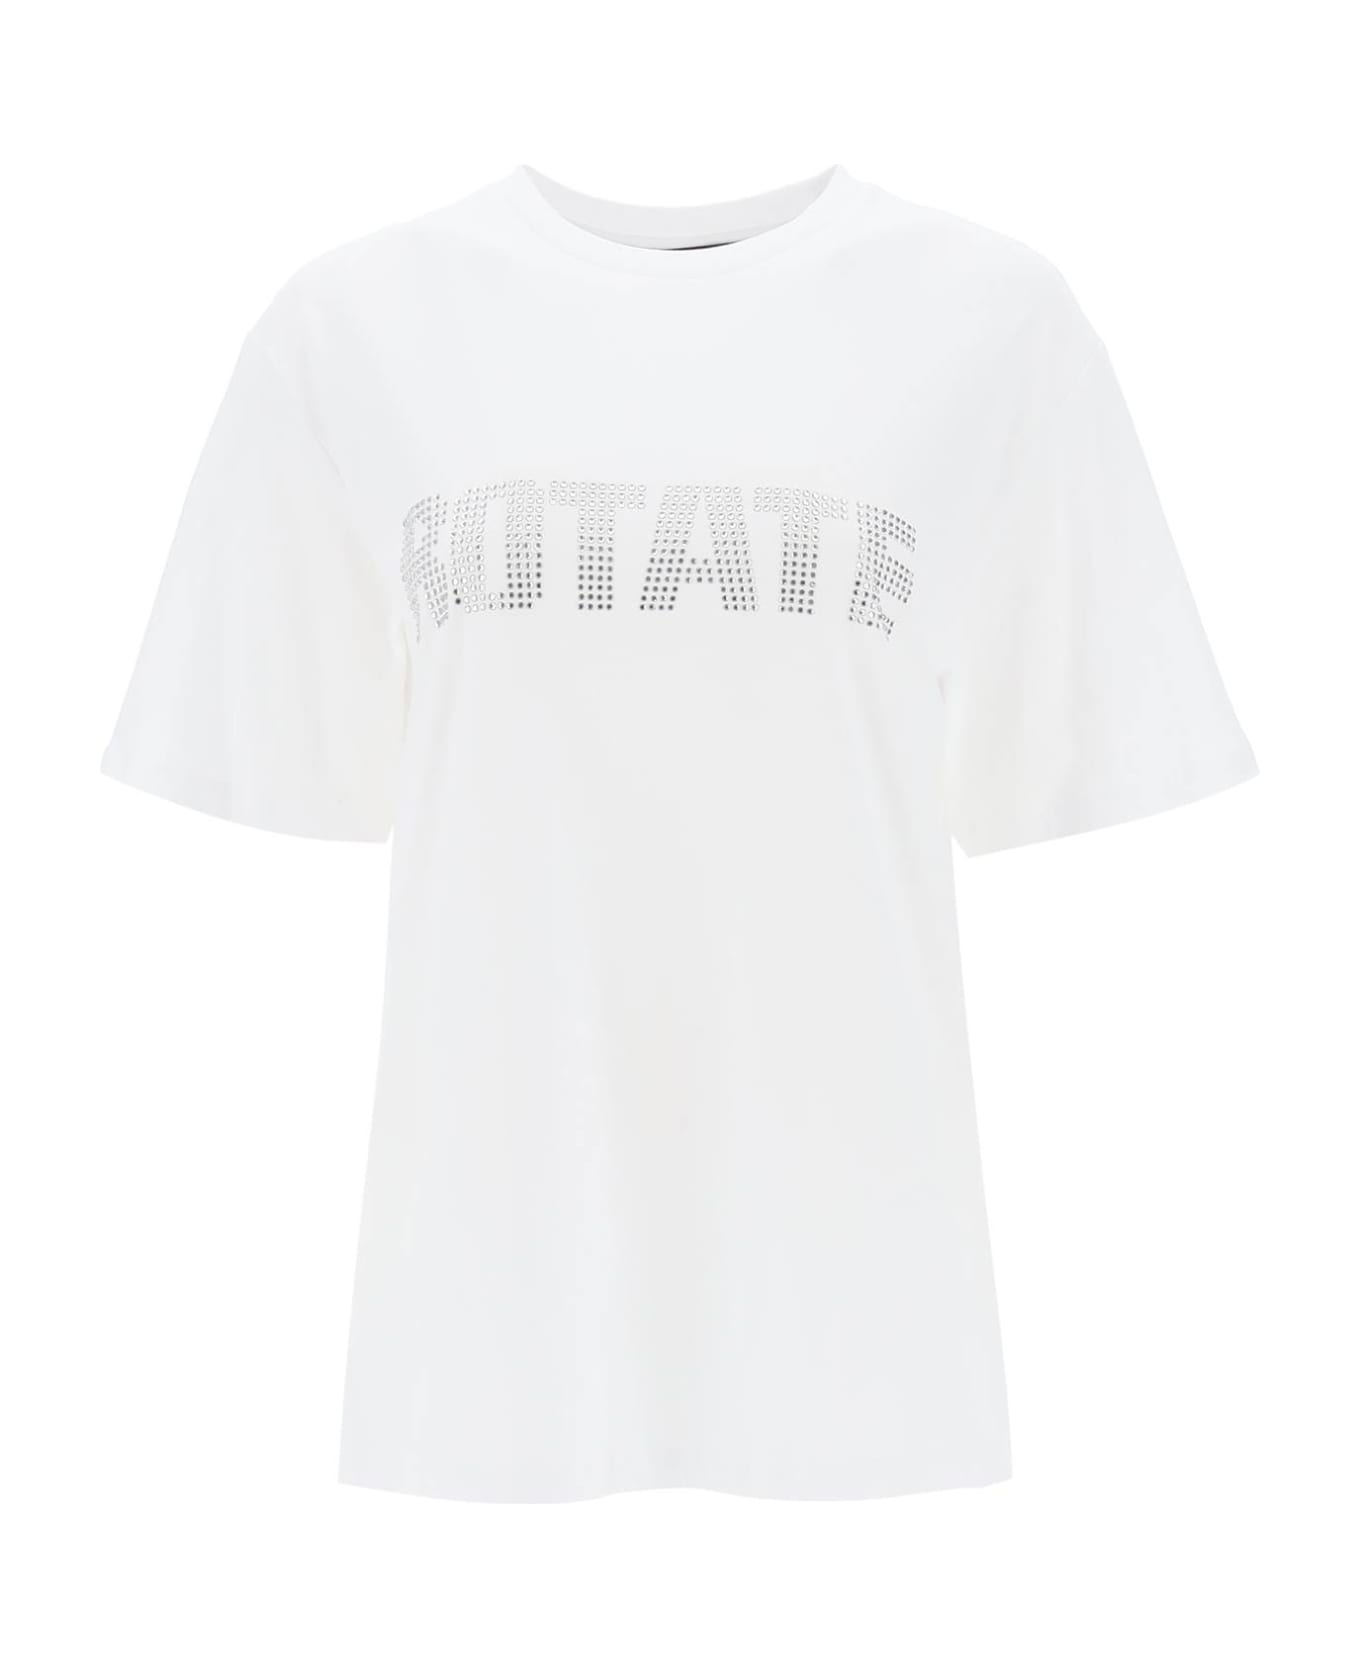 Rotate by Birger Christensen Crew-neck T-shirt With Crystal Logo - BRIGHT WHITE (White)